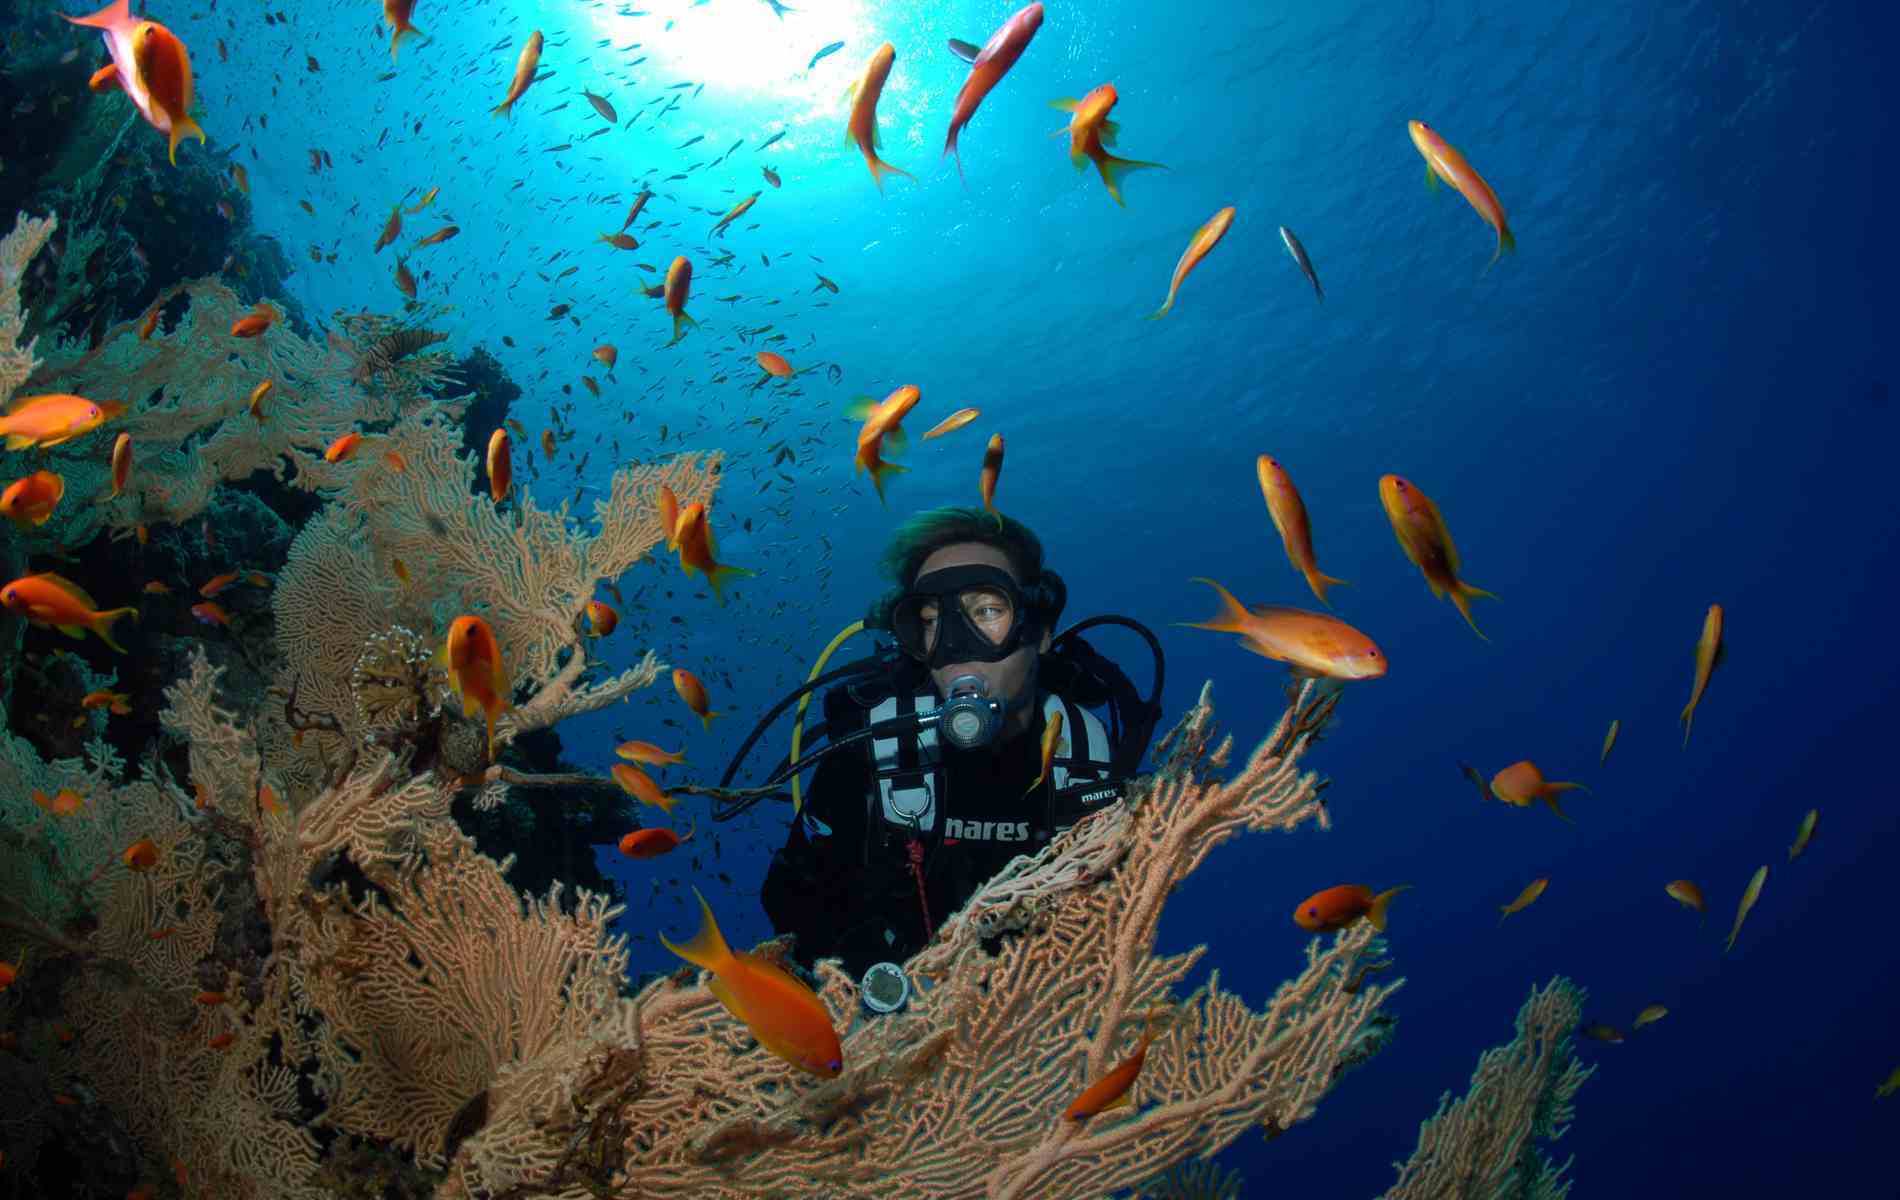 Diver at the reef